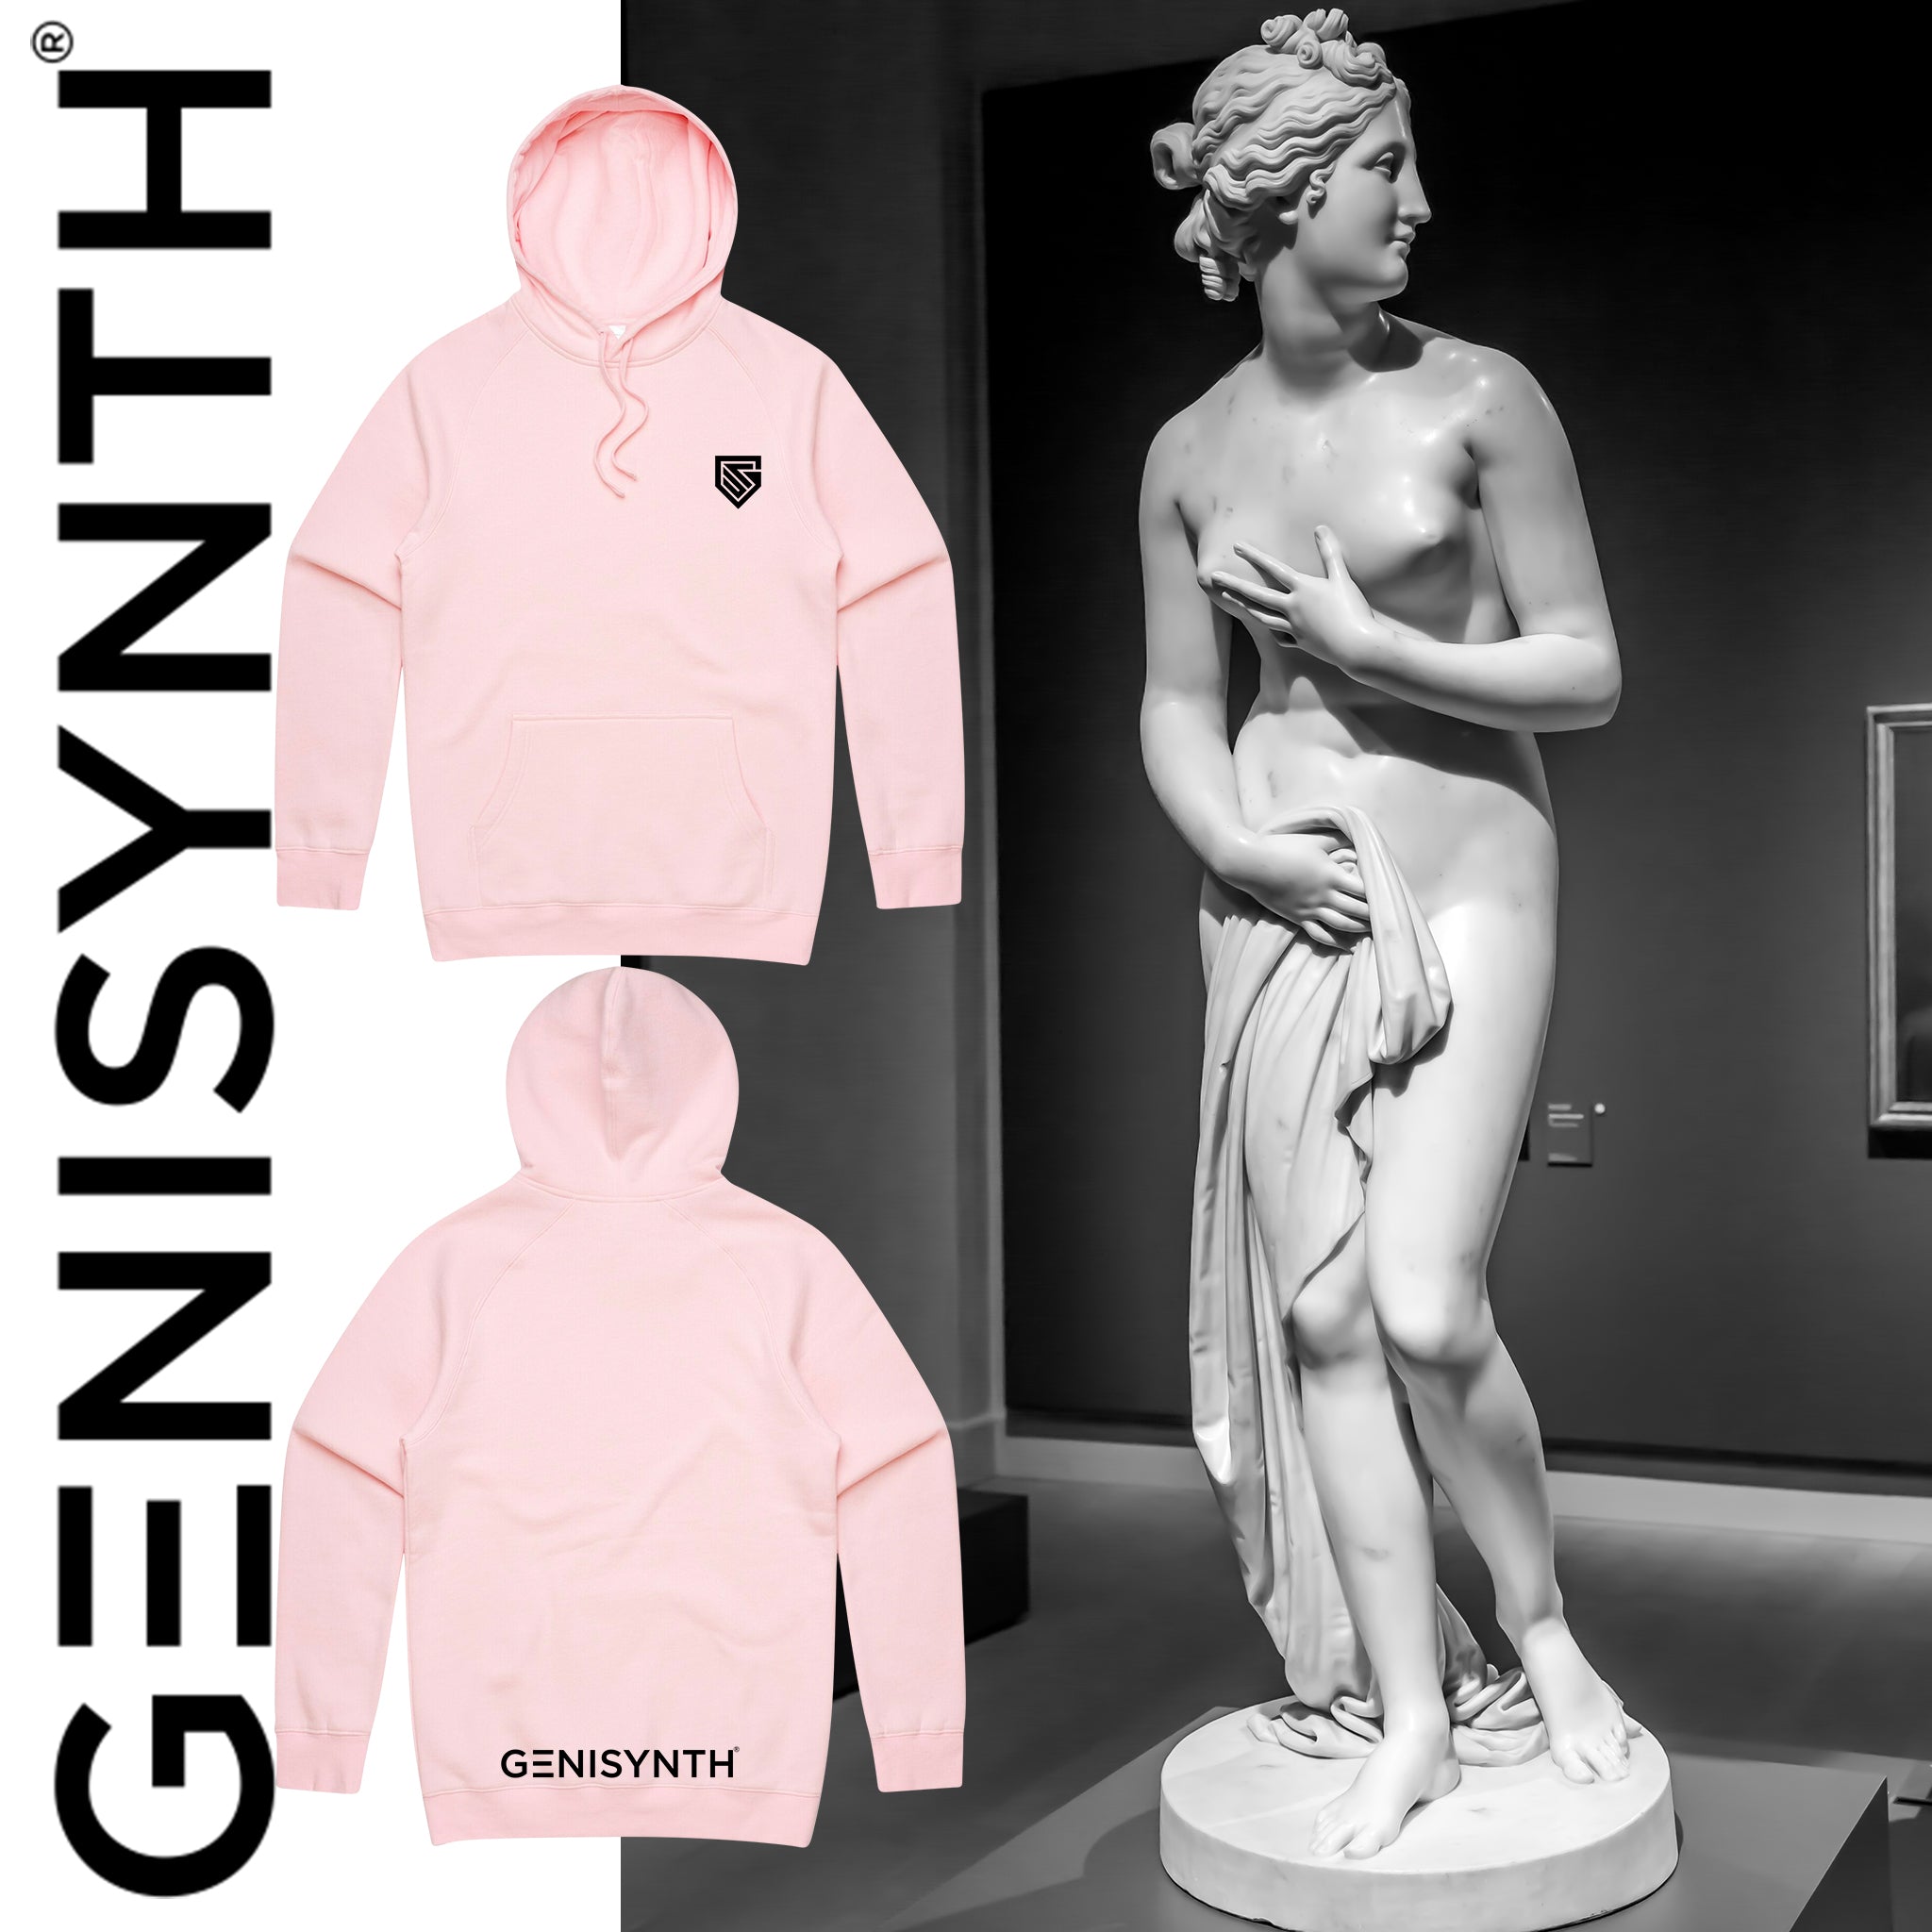 Genisynth logo on both sides of Pink hoodie